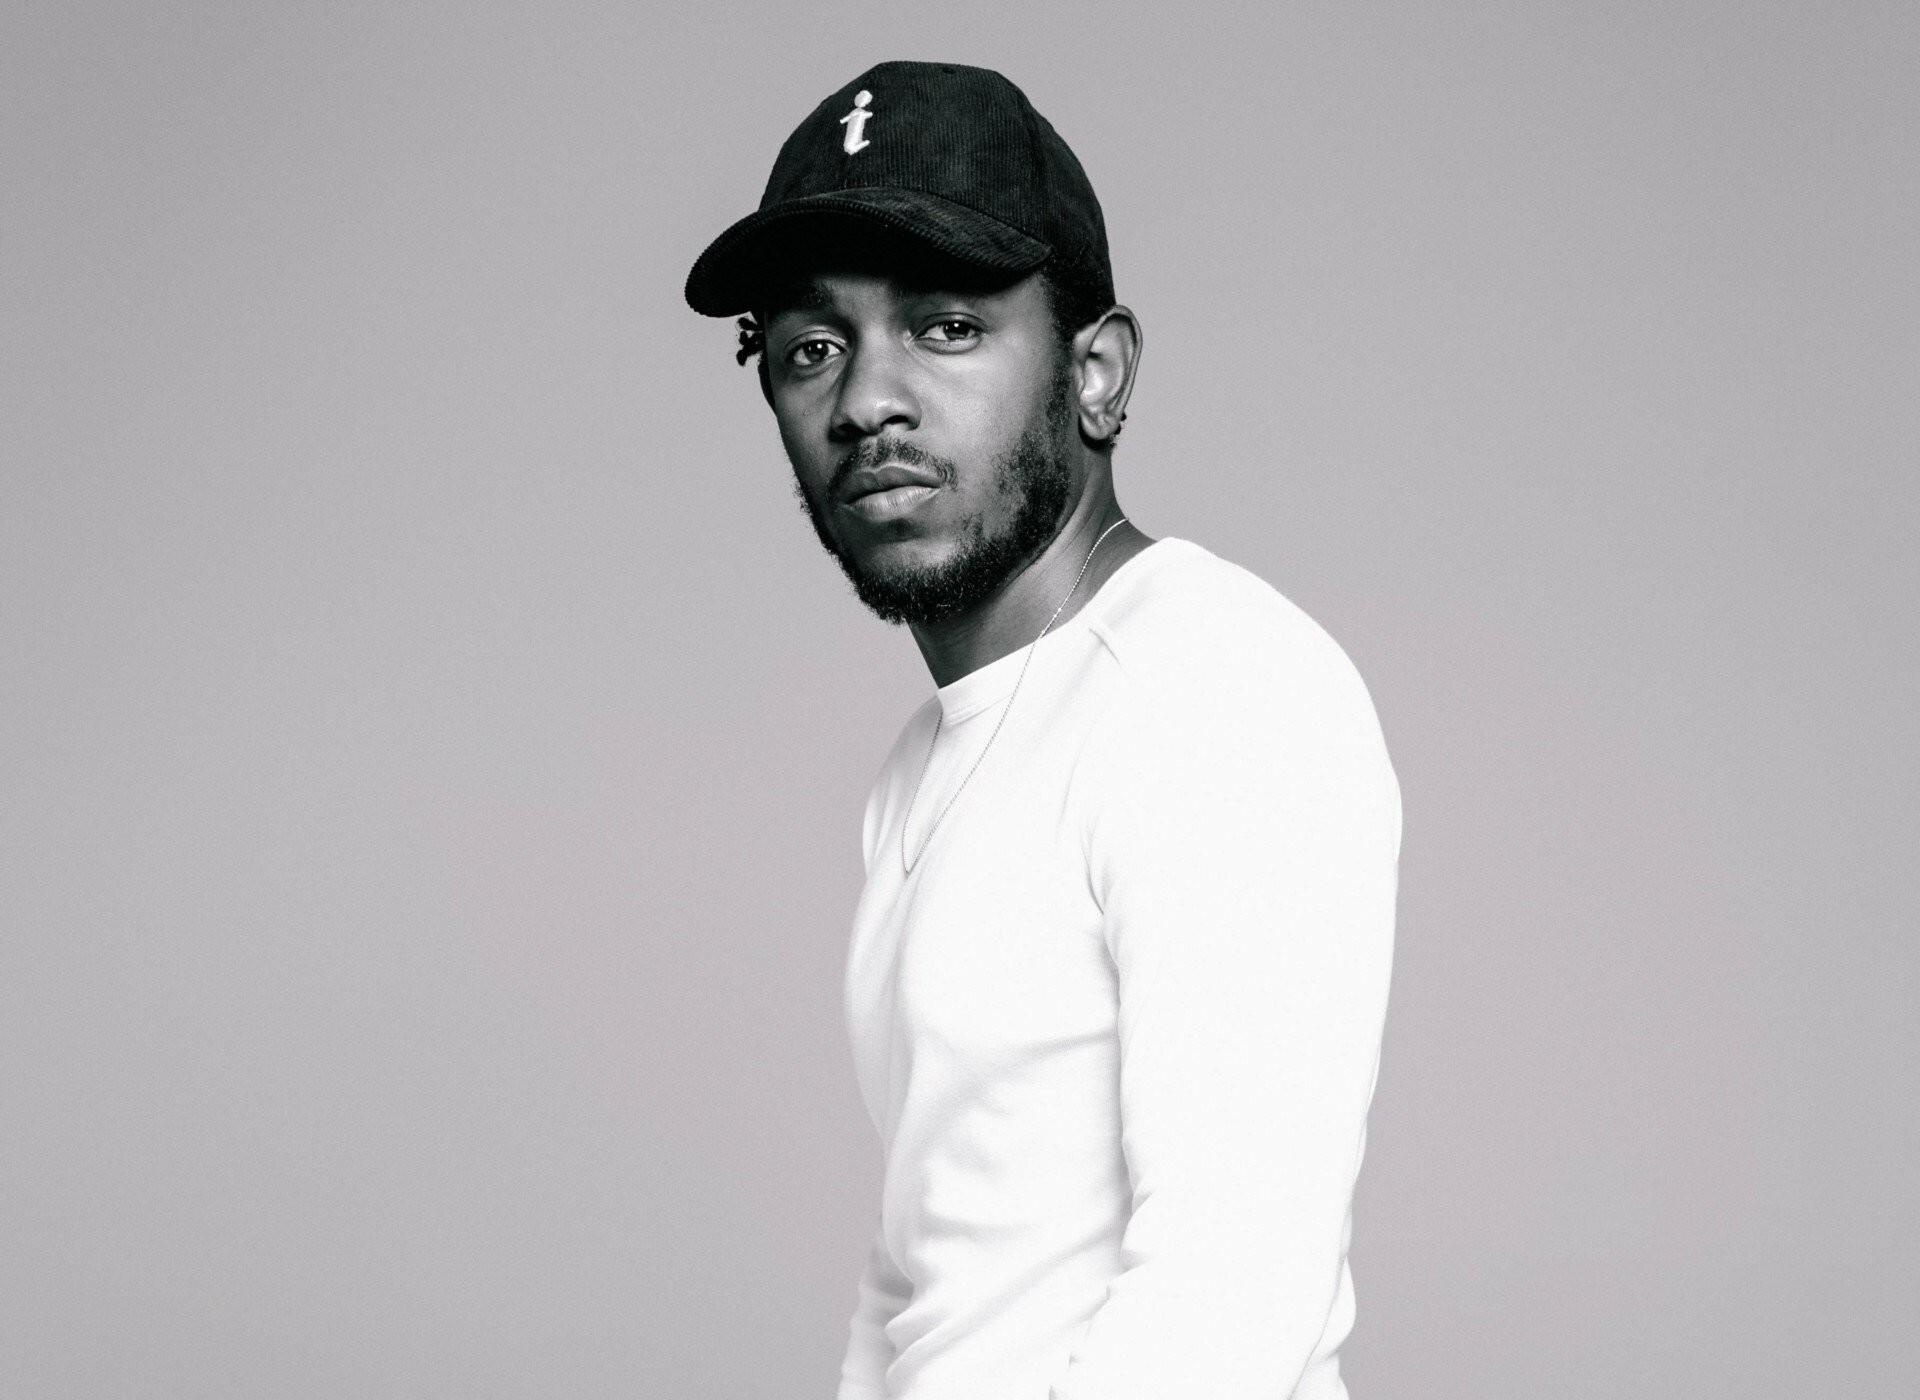 Kendrick Lamar: He topped the Billboard Hot 100 for the first time with the remix of "Bad Blood" by Taylor Swift. 1920x1400 HD Background.